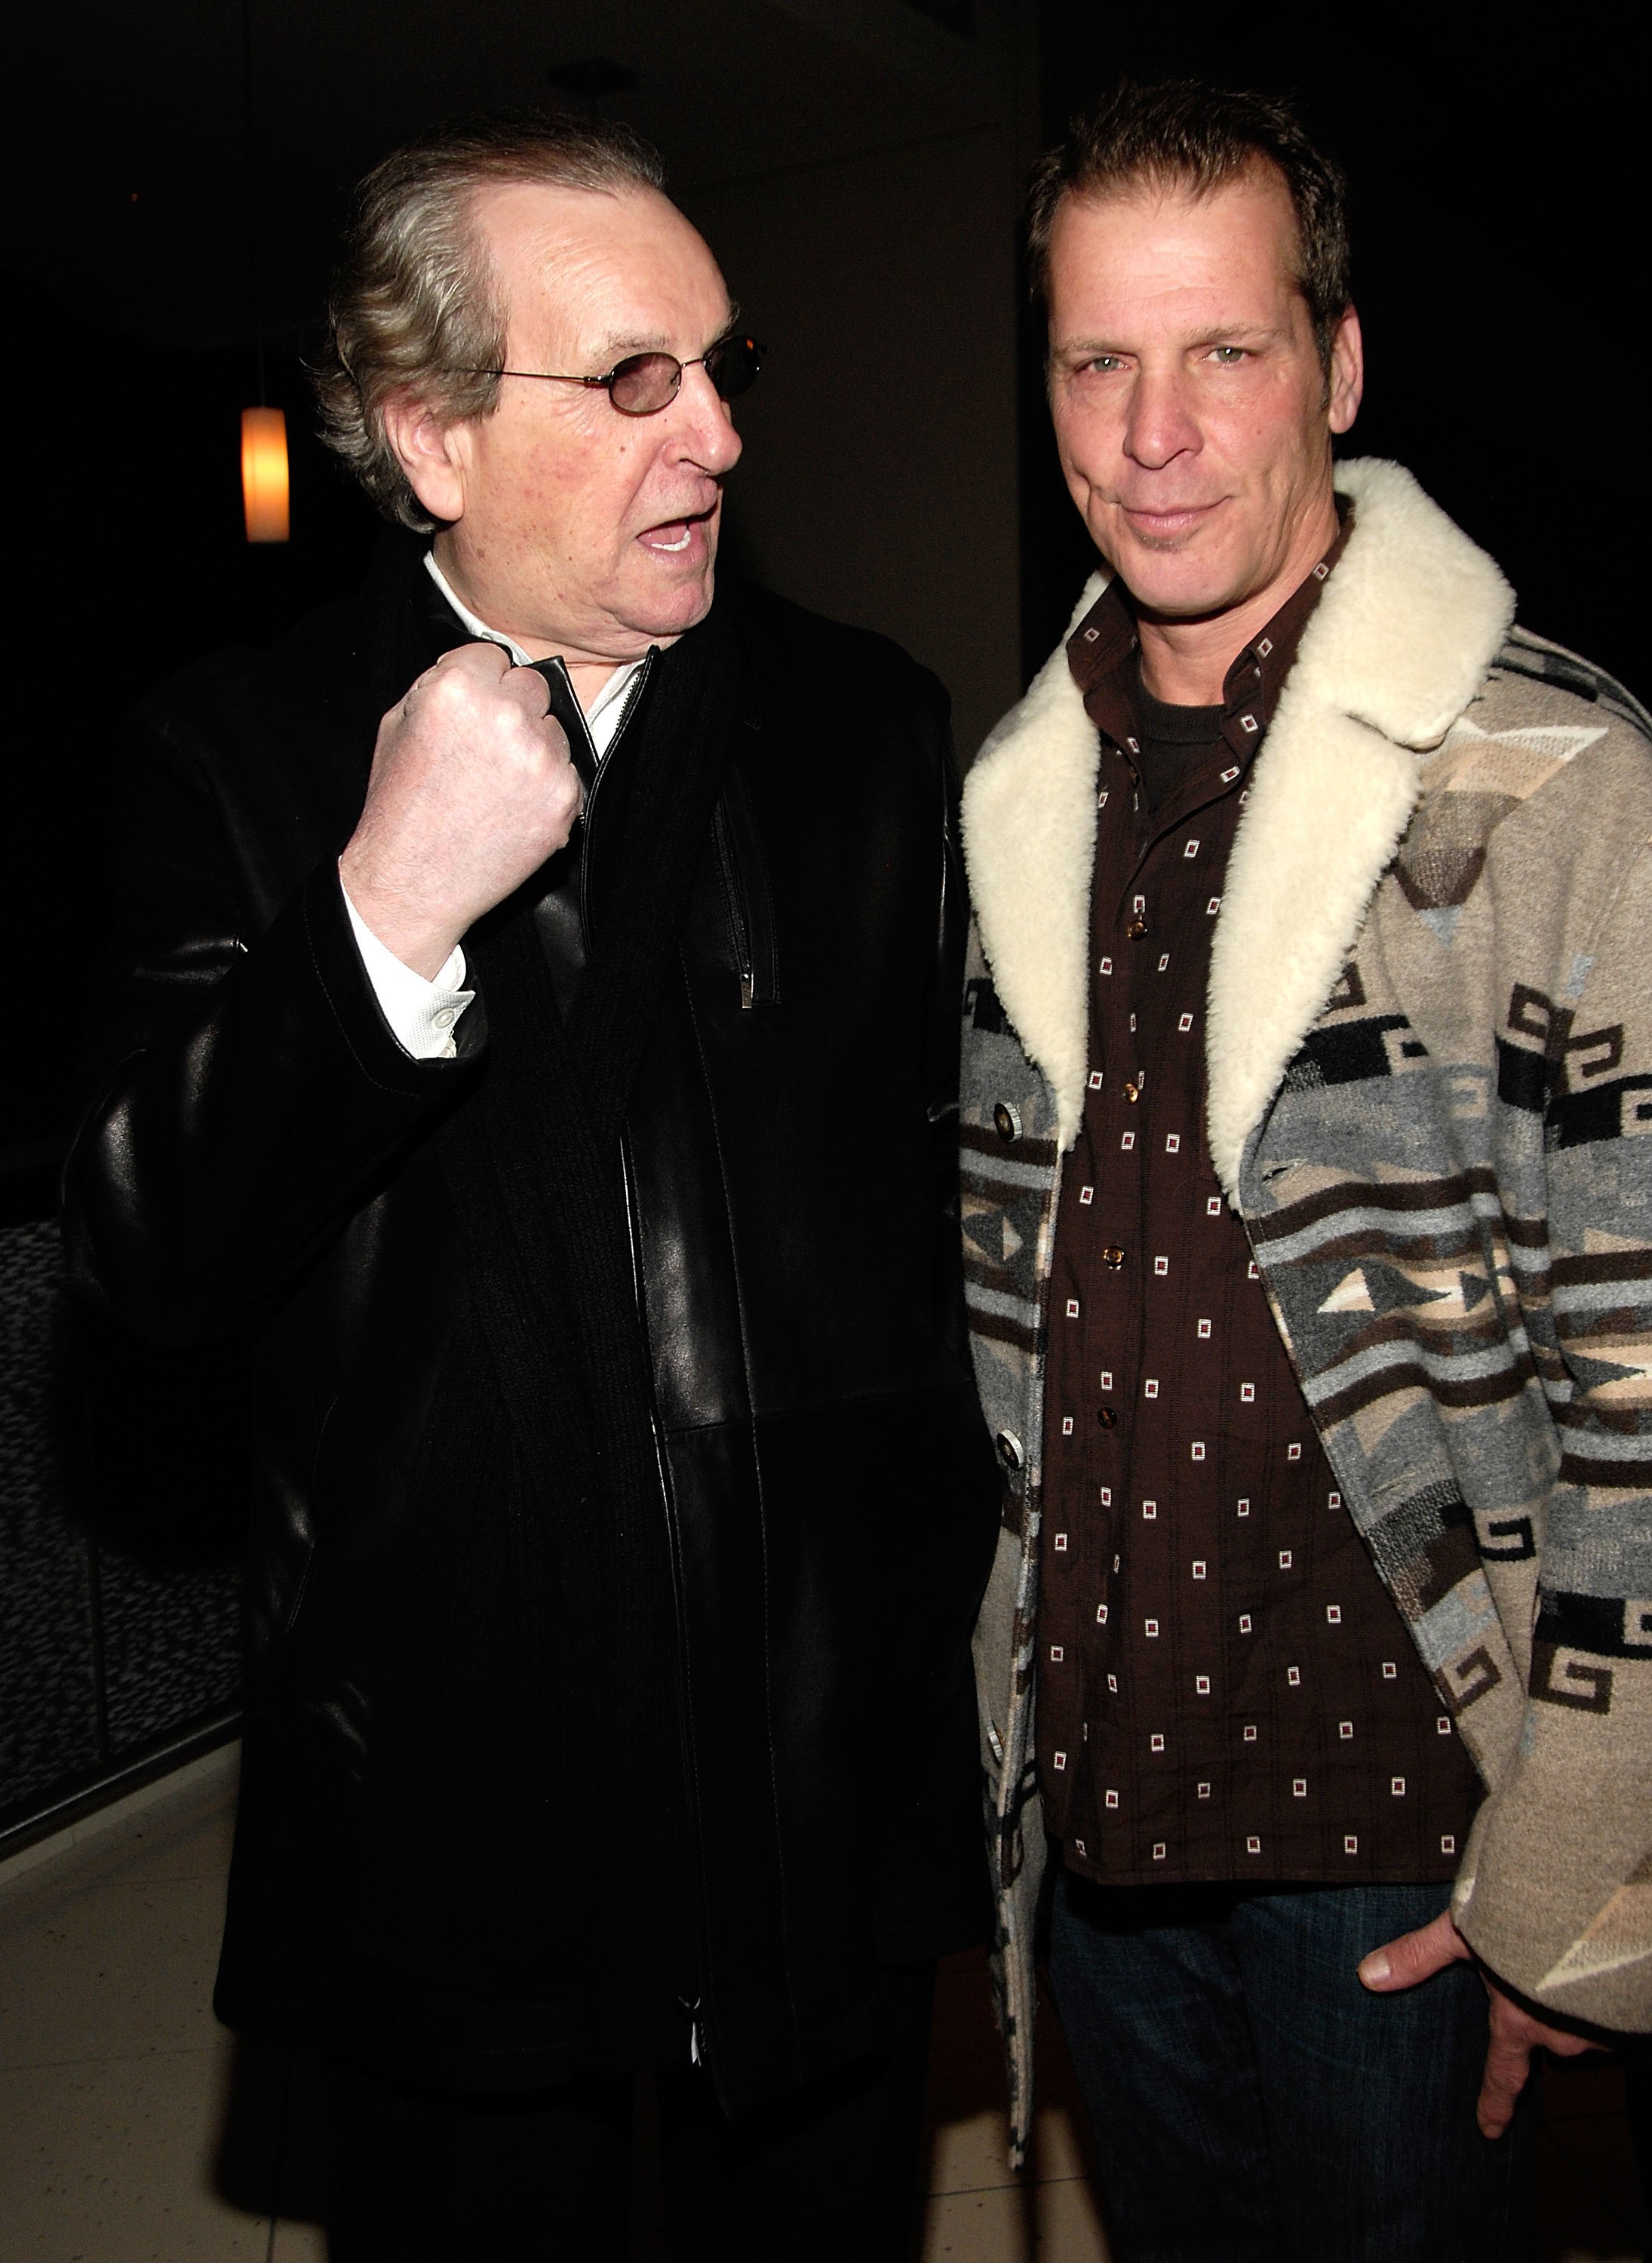 NEW YORK - FEBRUARY 11:  Actor Danny Aiello with his son Rick Aiello during the celebration of the release of Richard Zoglin's book  'Comedy at the Edge - How Stand Up in the 1970s Changed America' at The Time Warner Center on February 11, 2008 in New Yor (Foto: WireImage)